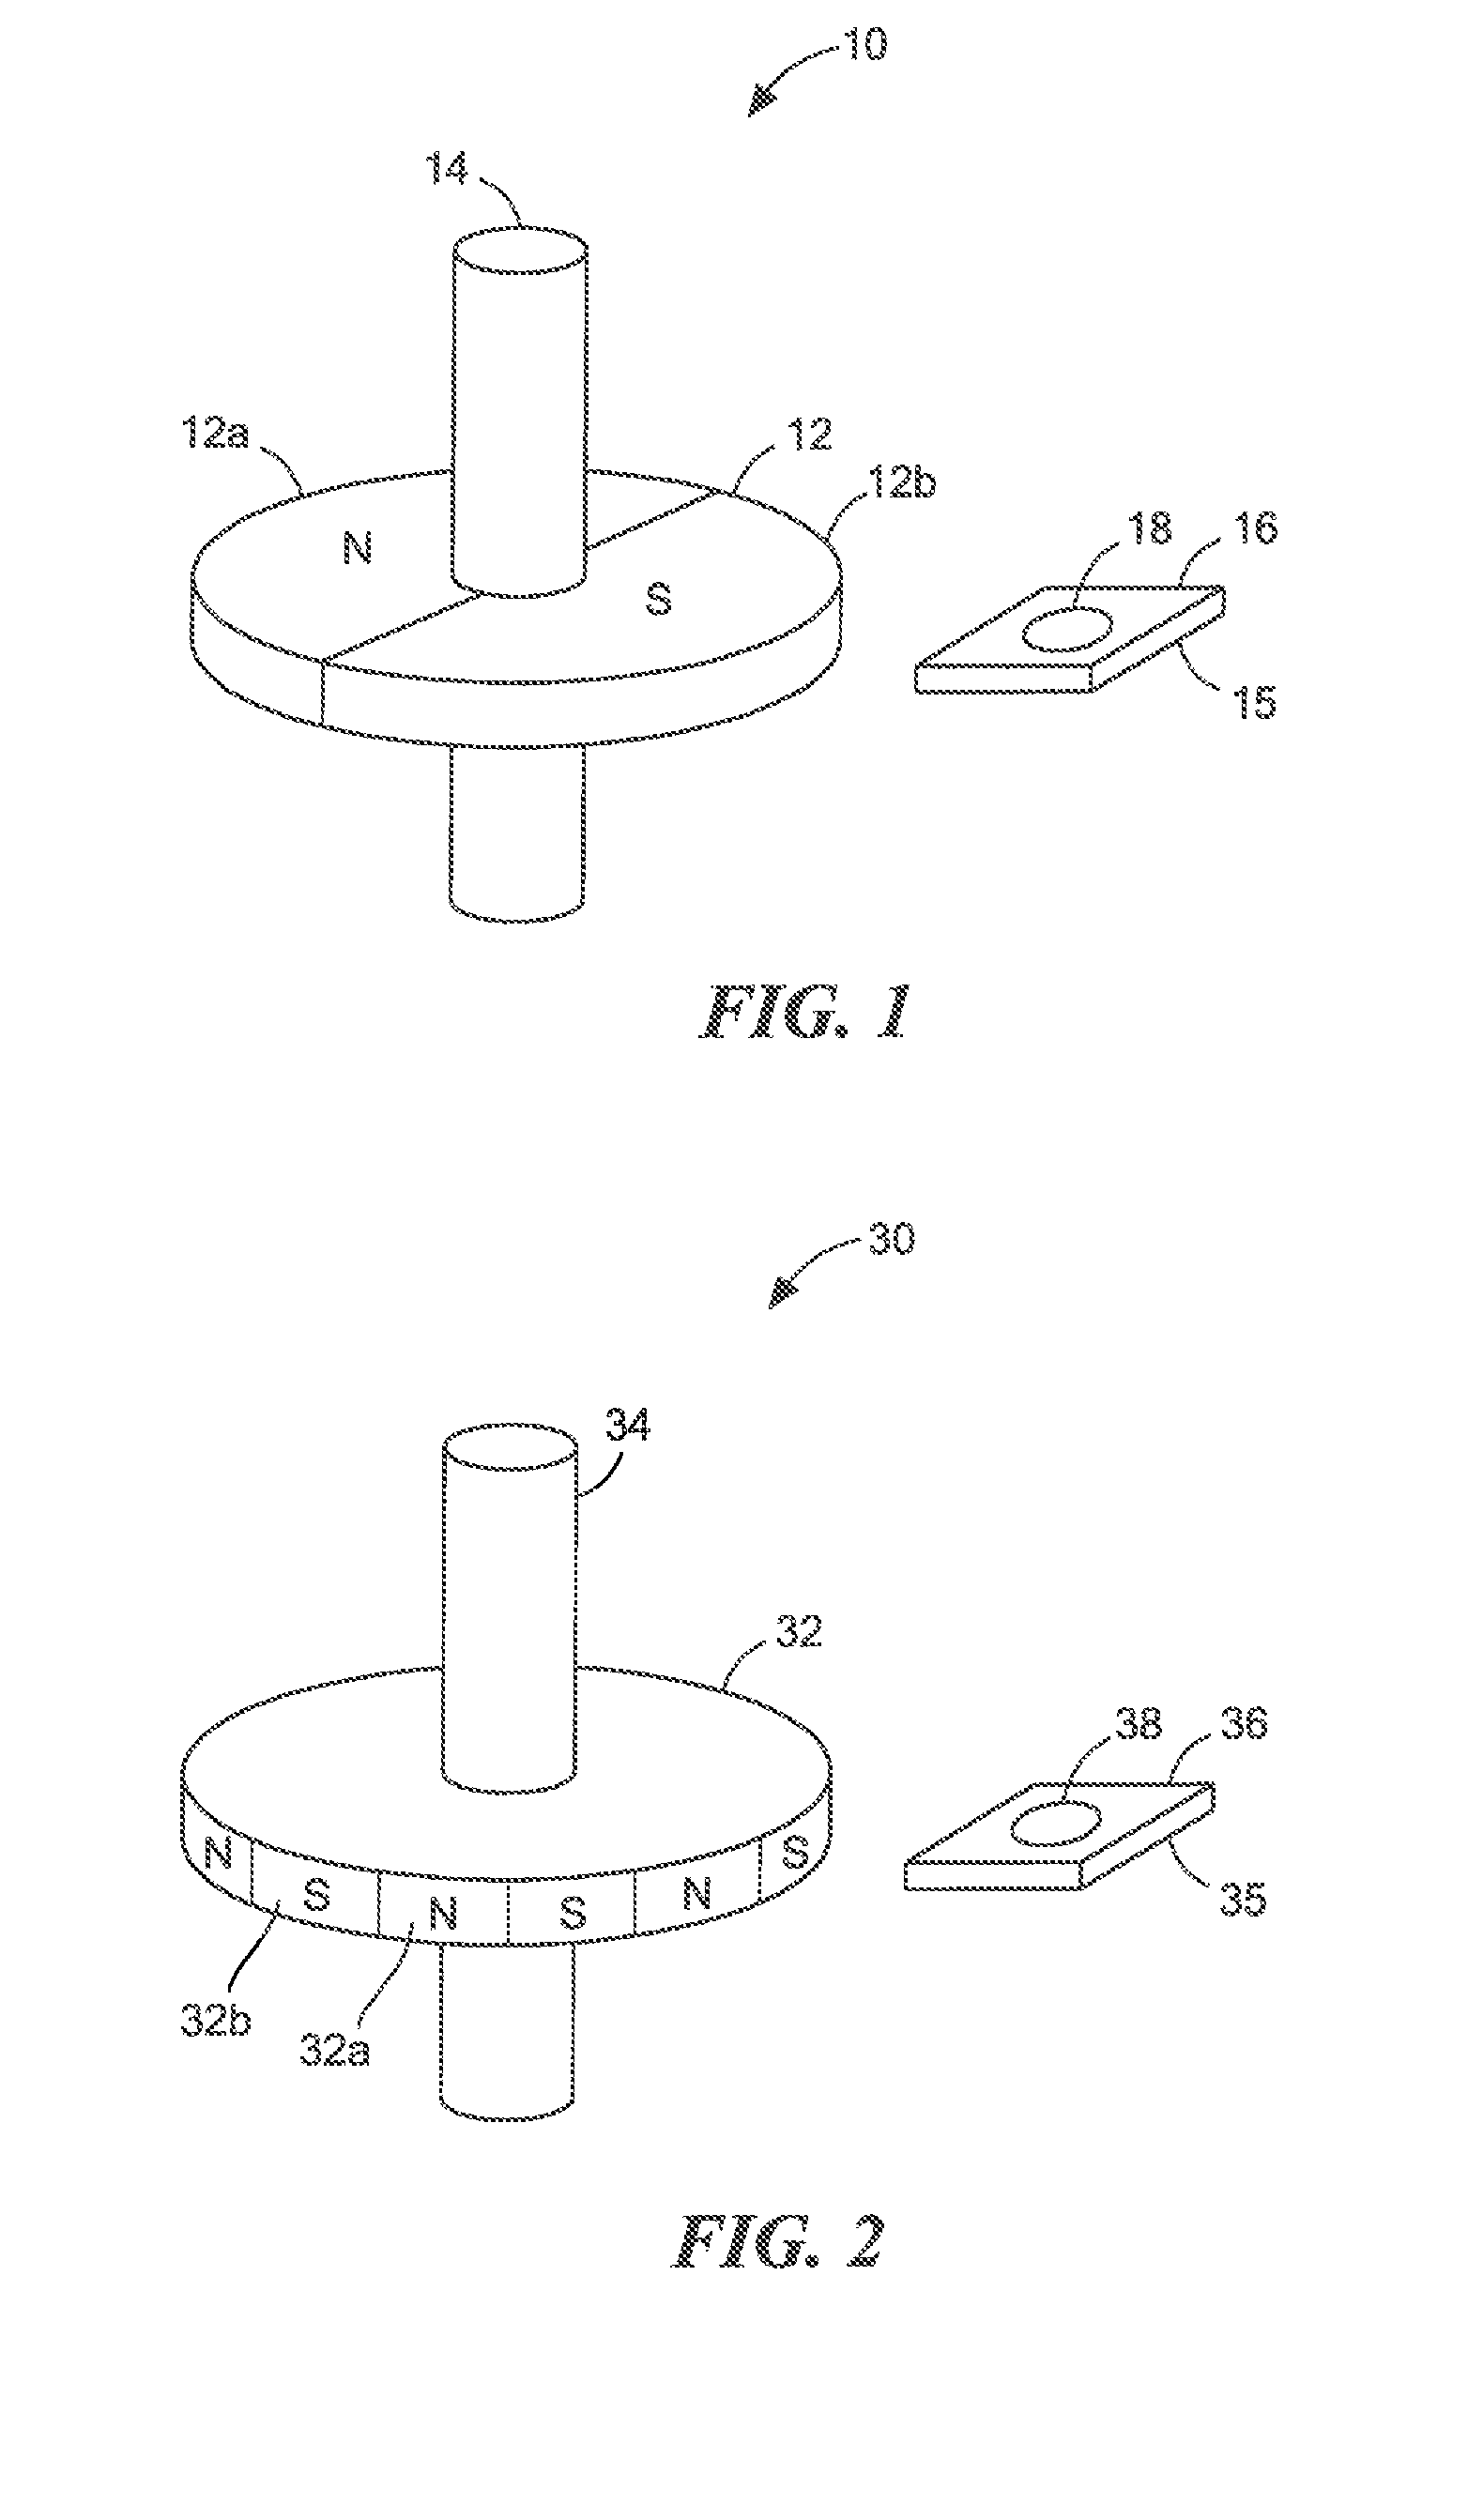 Circuits and Methods for Processing Signals Generated by a Circular Vertical Hall (CVH) Sensing Element in the Presence of a Multi-Pole Magnet